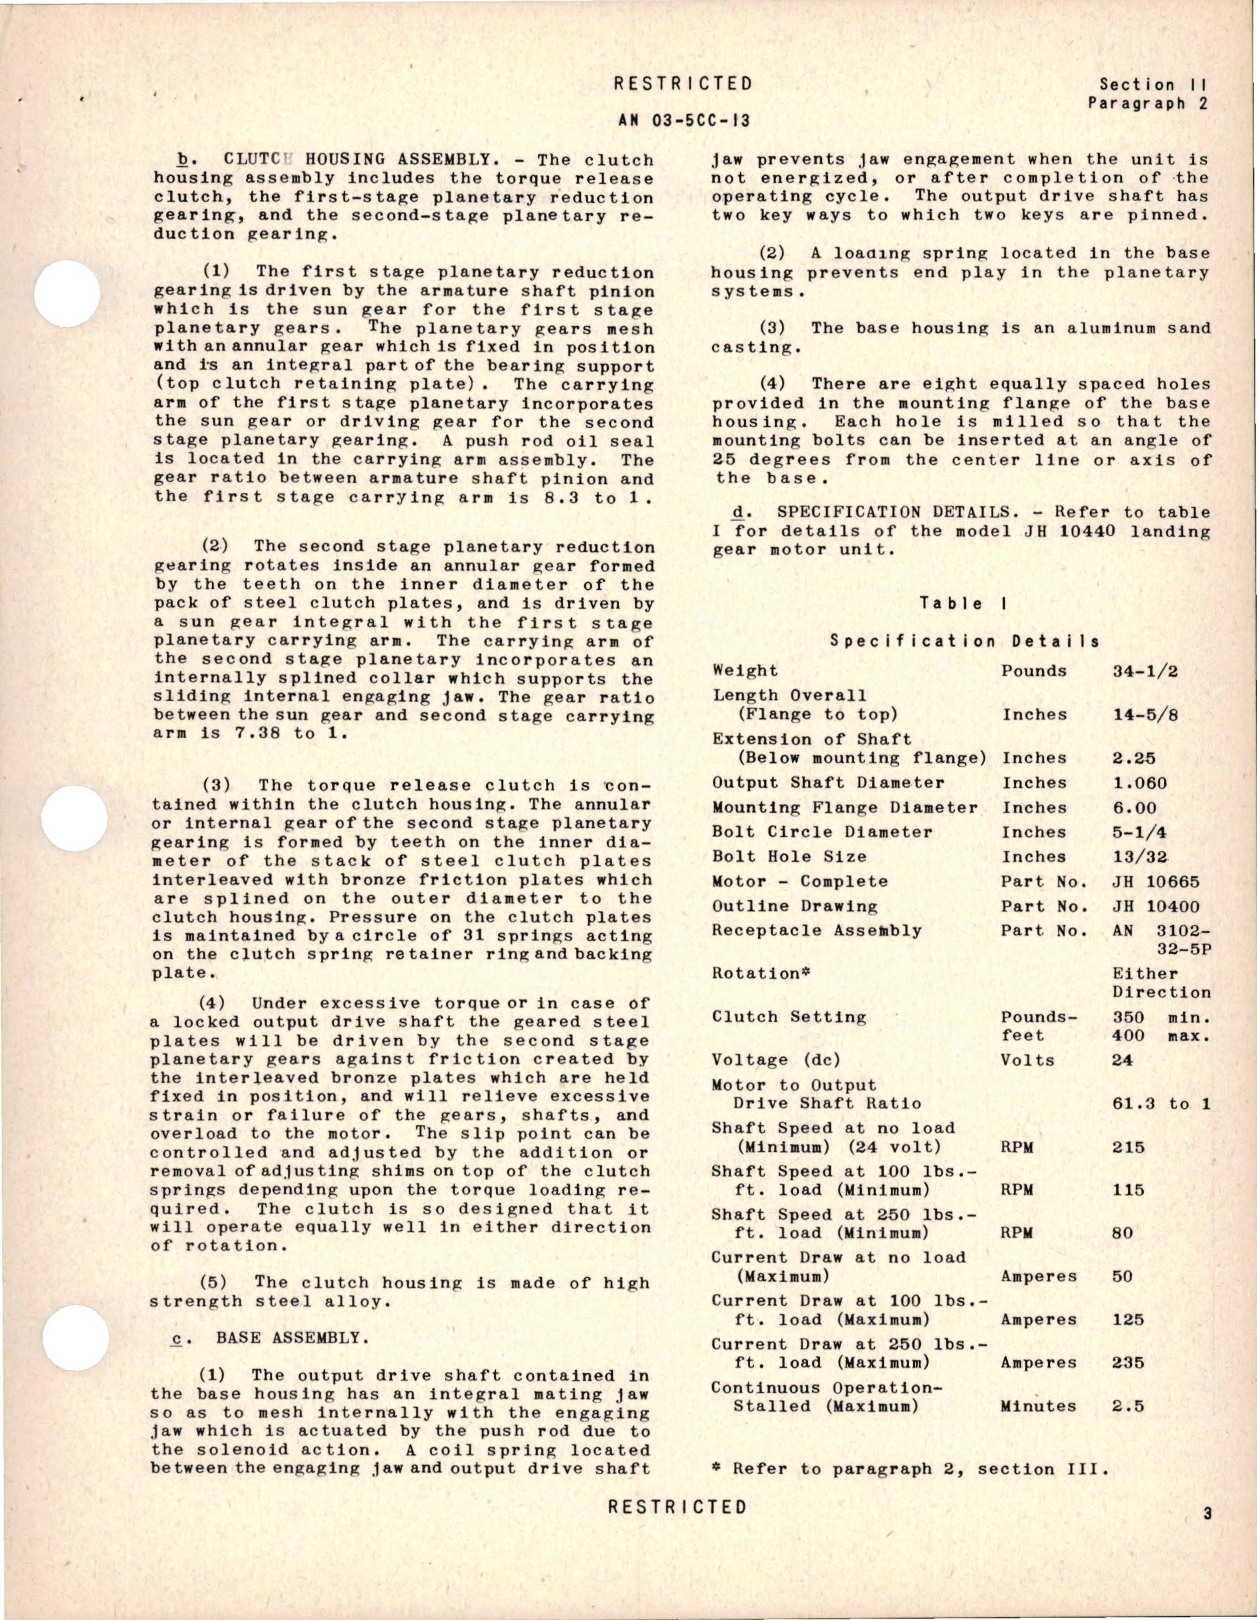 Sample page 7 from AirCorps Library document: Operation, Service and Overhaul Instructions with Parts Catalog for Landing Wheel Retracting Motor - Model JH I0440